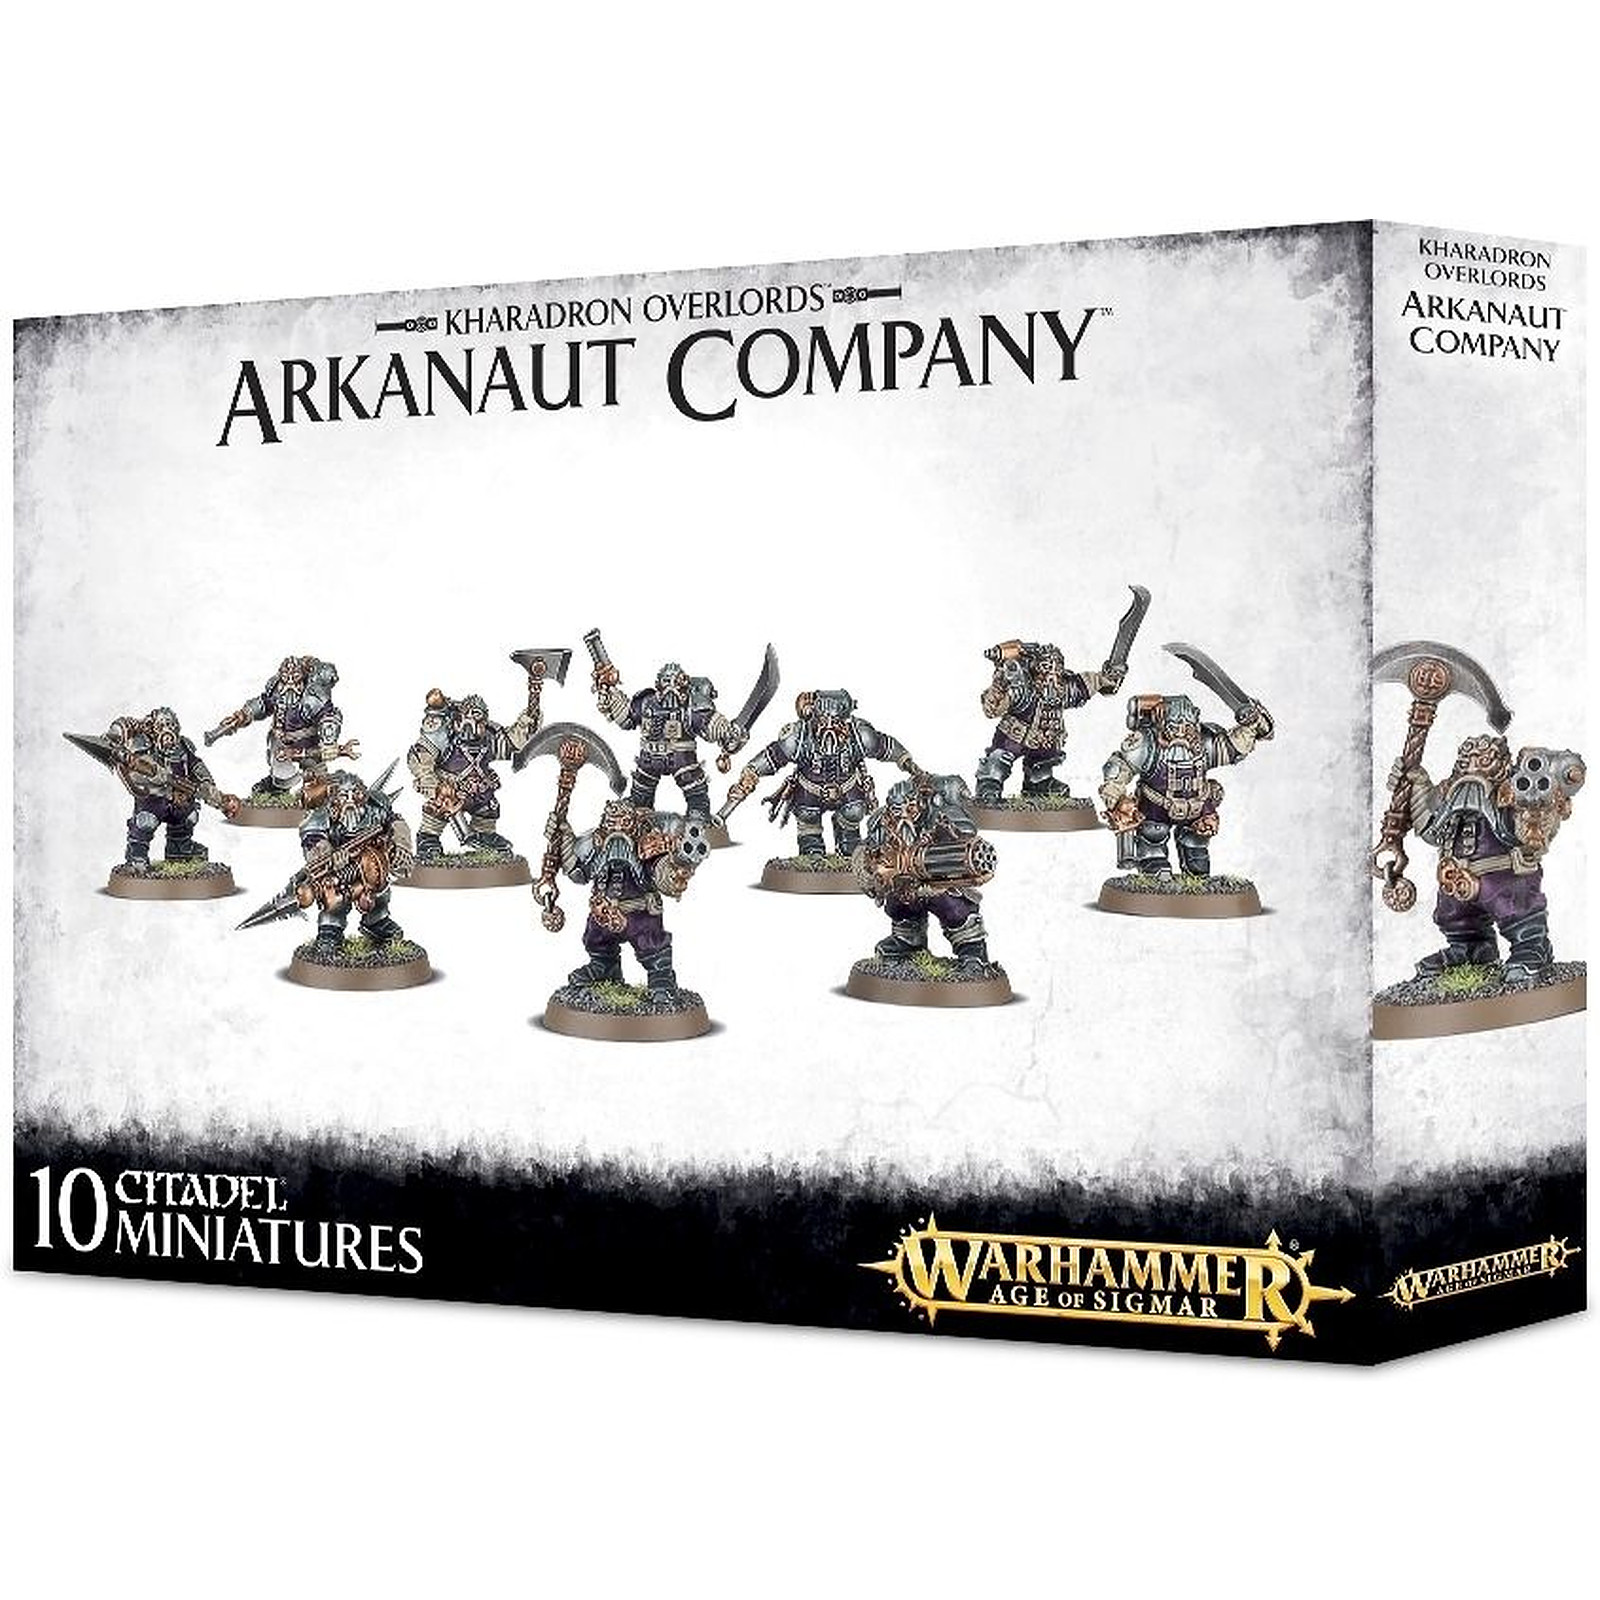 Warhammer AoS . - Kharadron Overlords Arkanaut Company - Jeux de figurines Games workshop